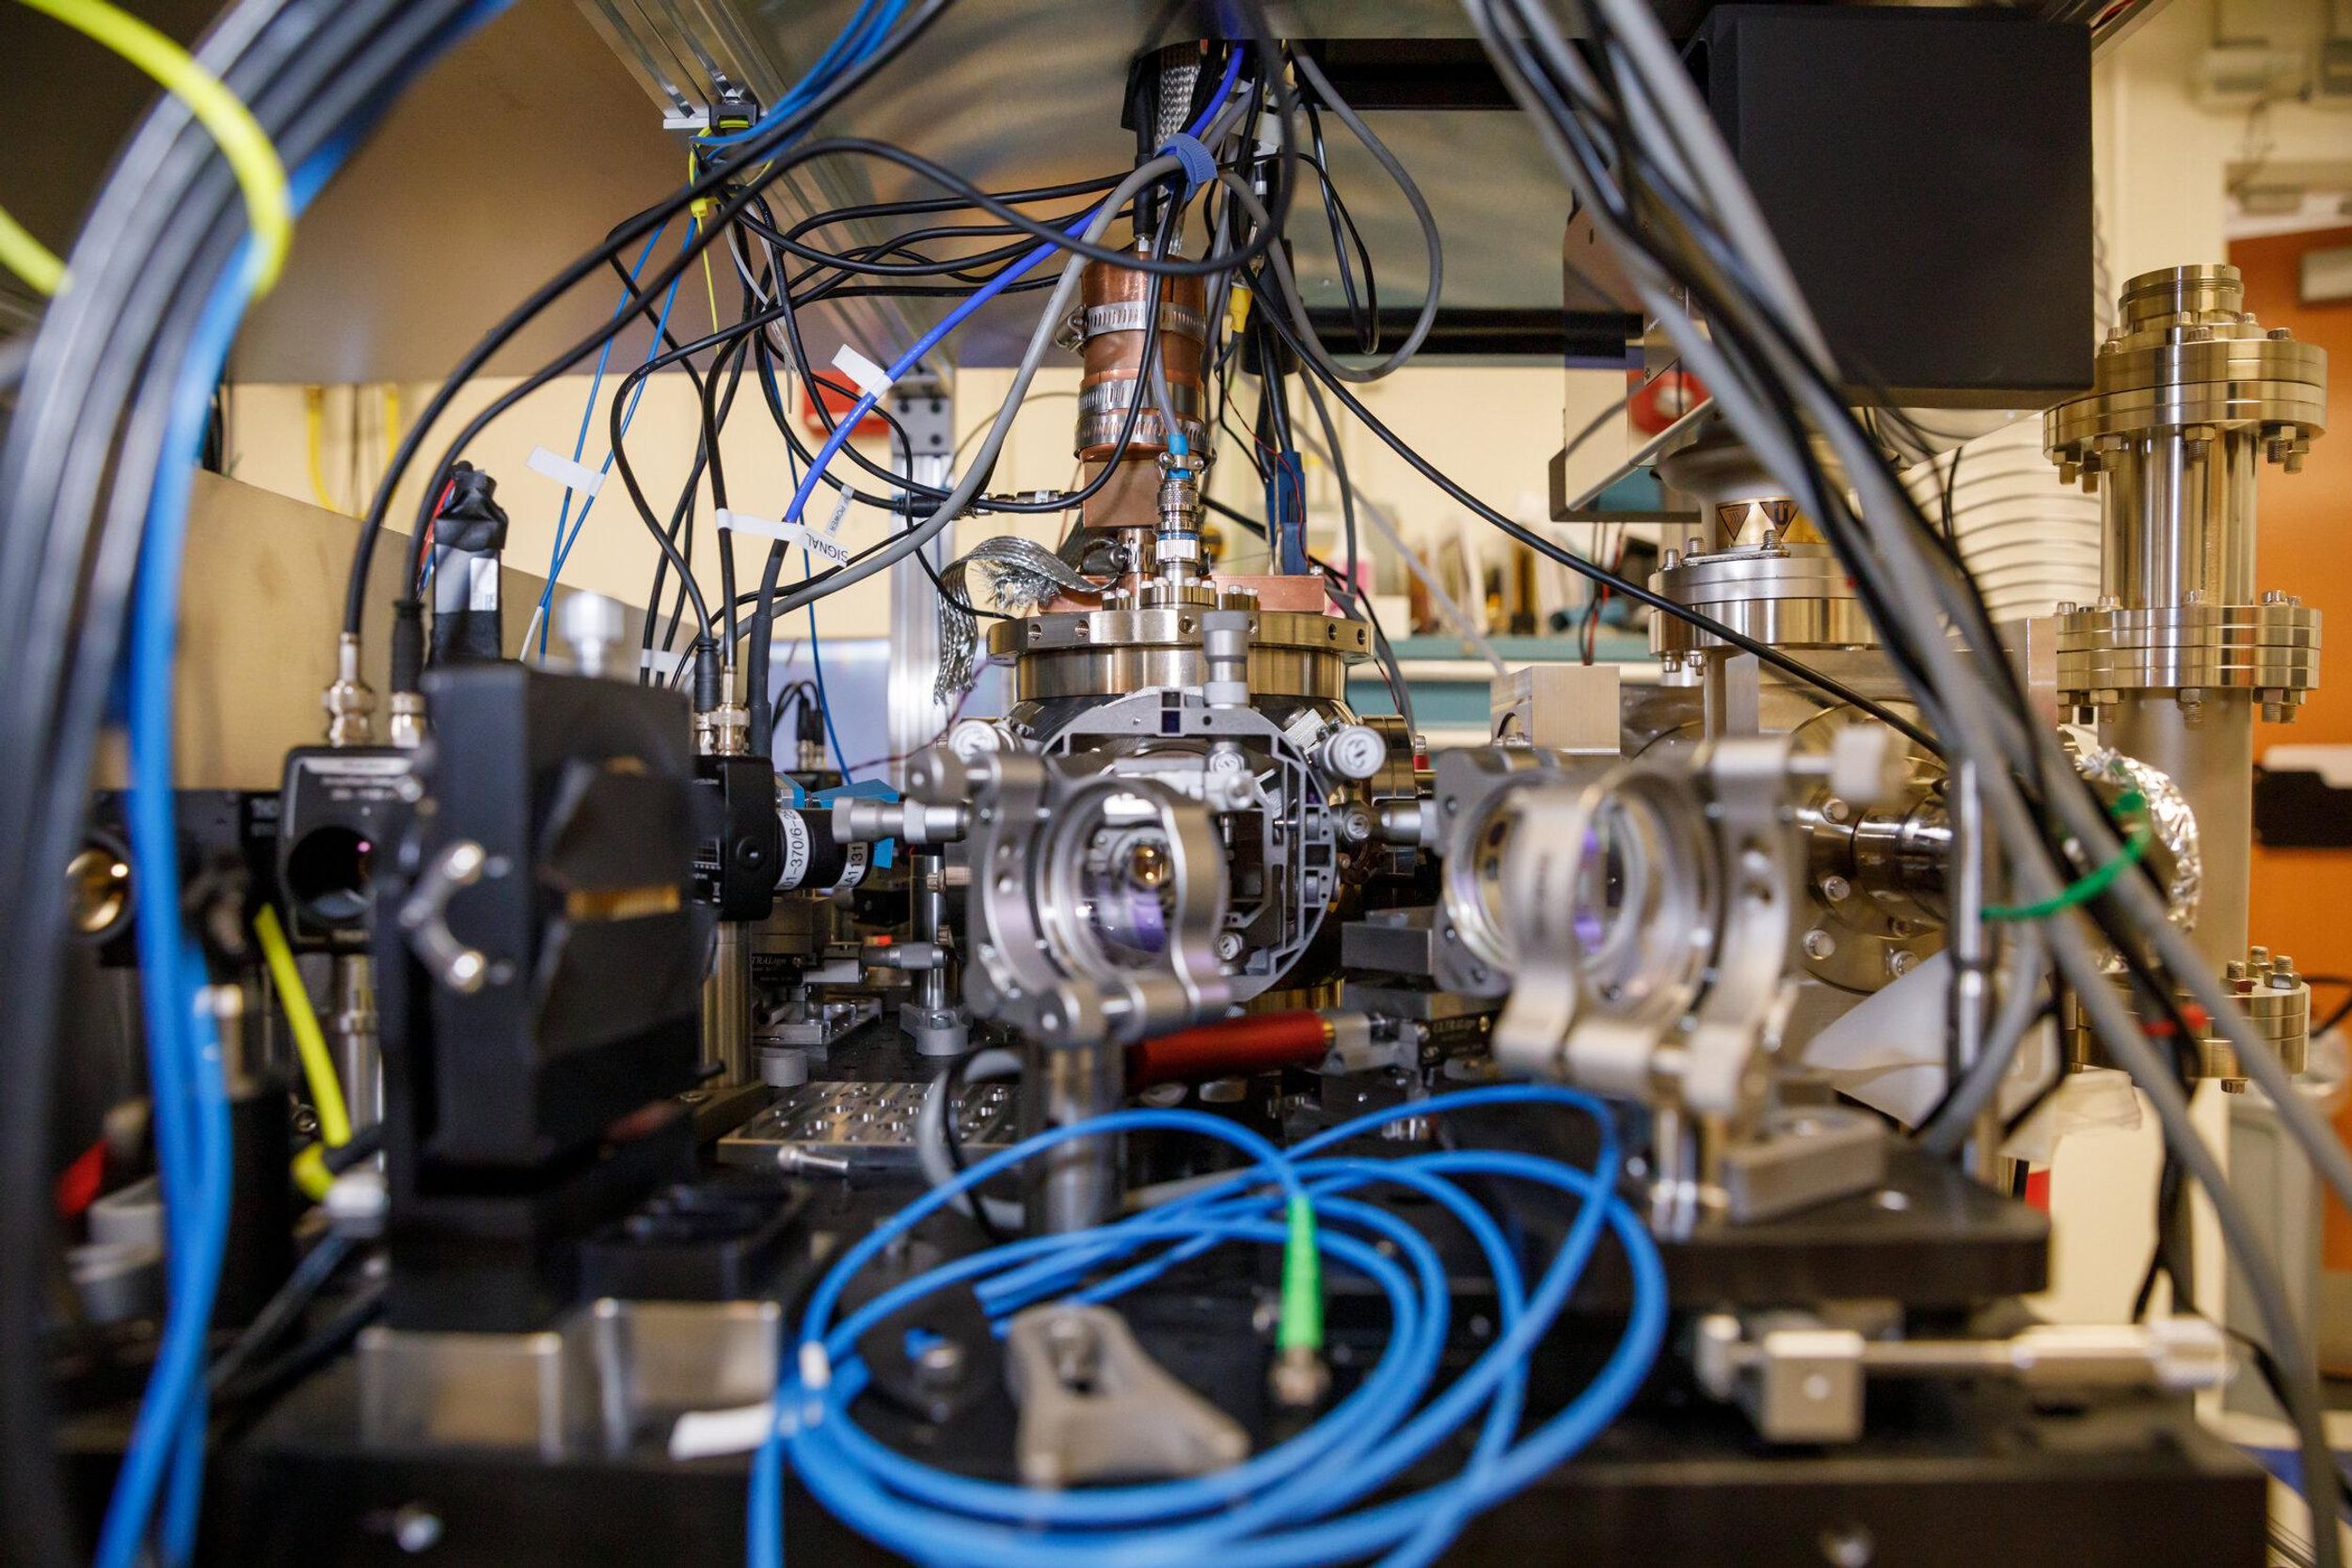 Wires, cryogenics, and optics equipment in a lab bench setting